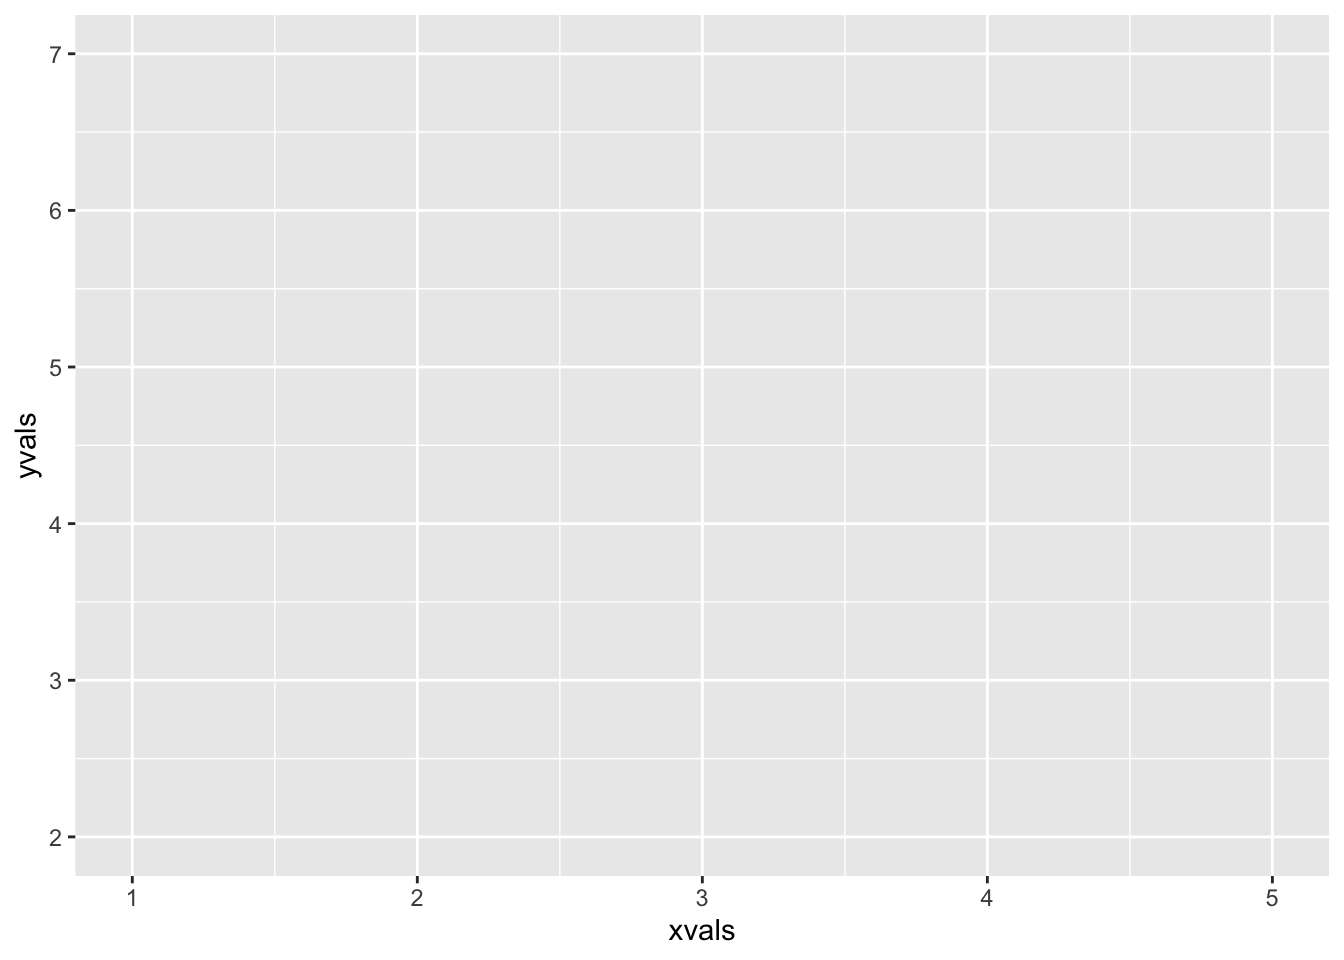 A ggplot2 plot without geoms.